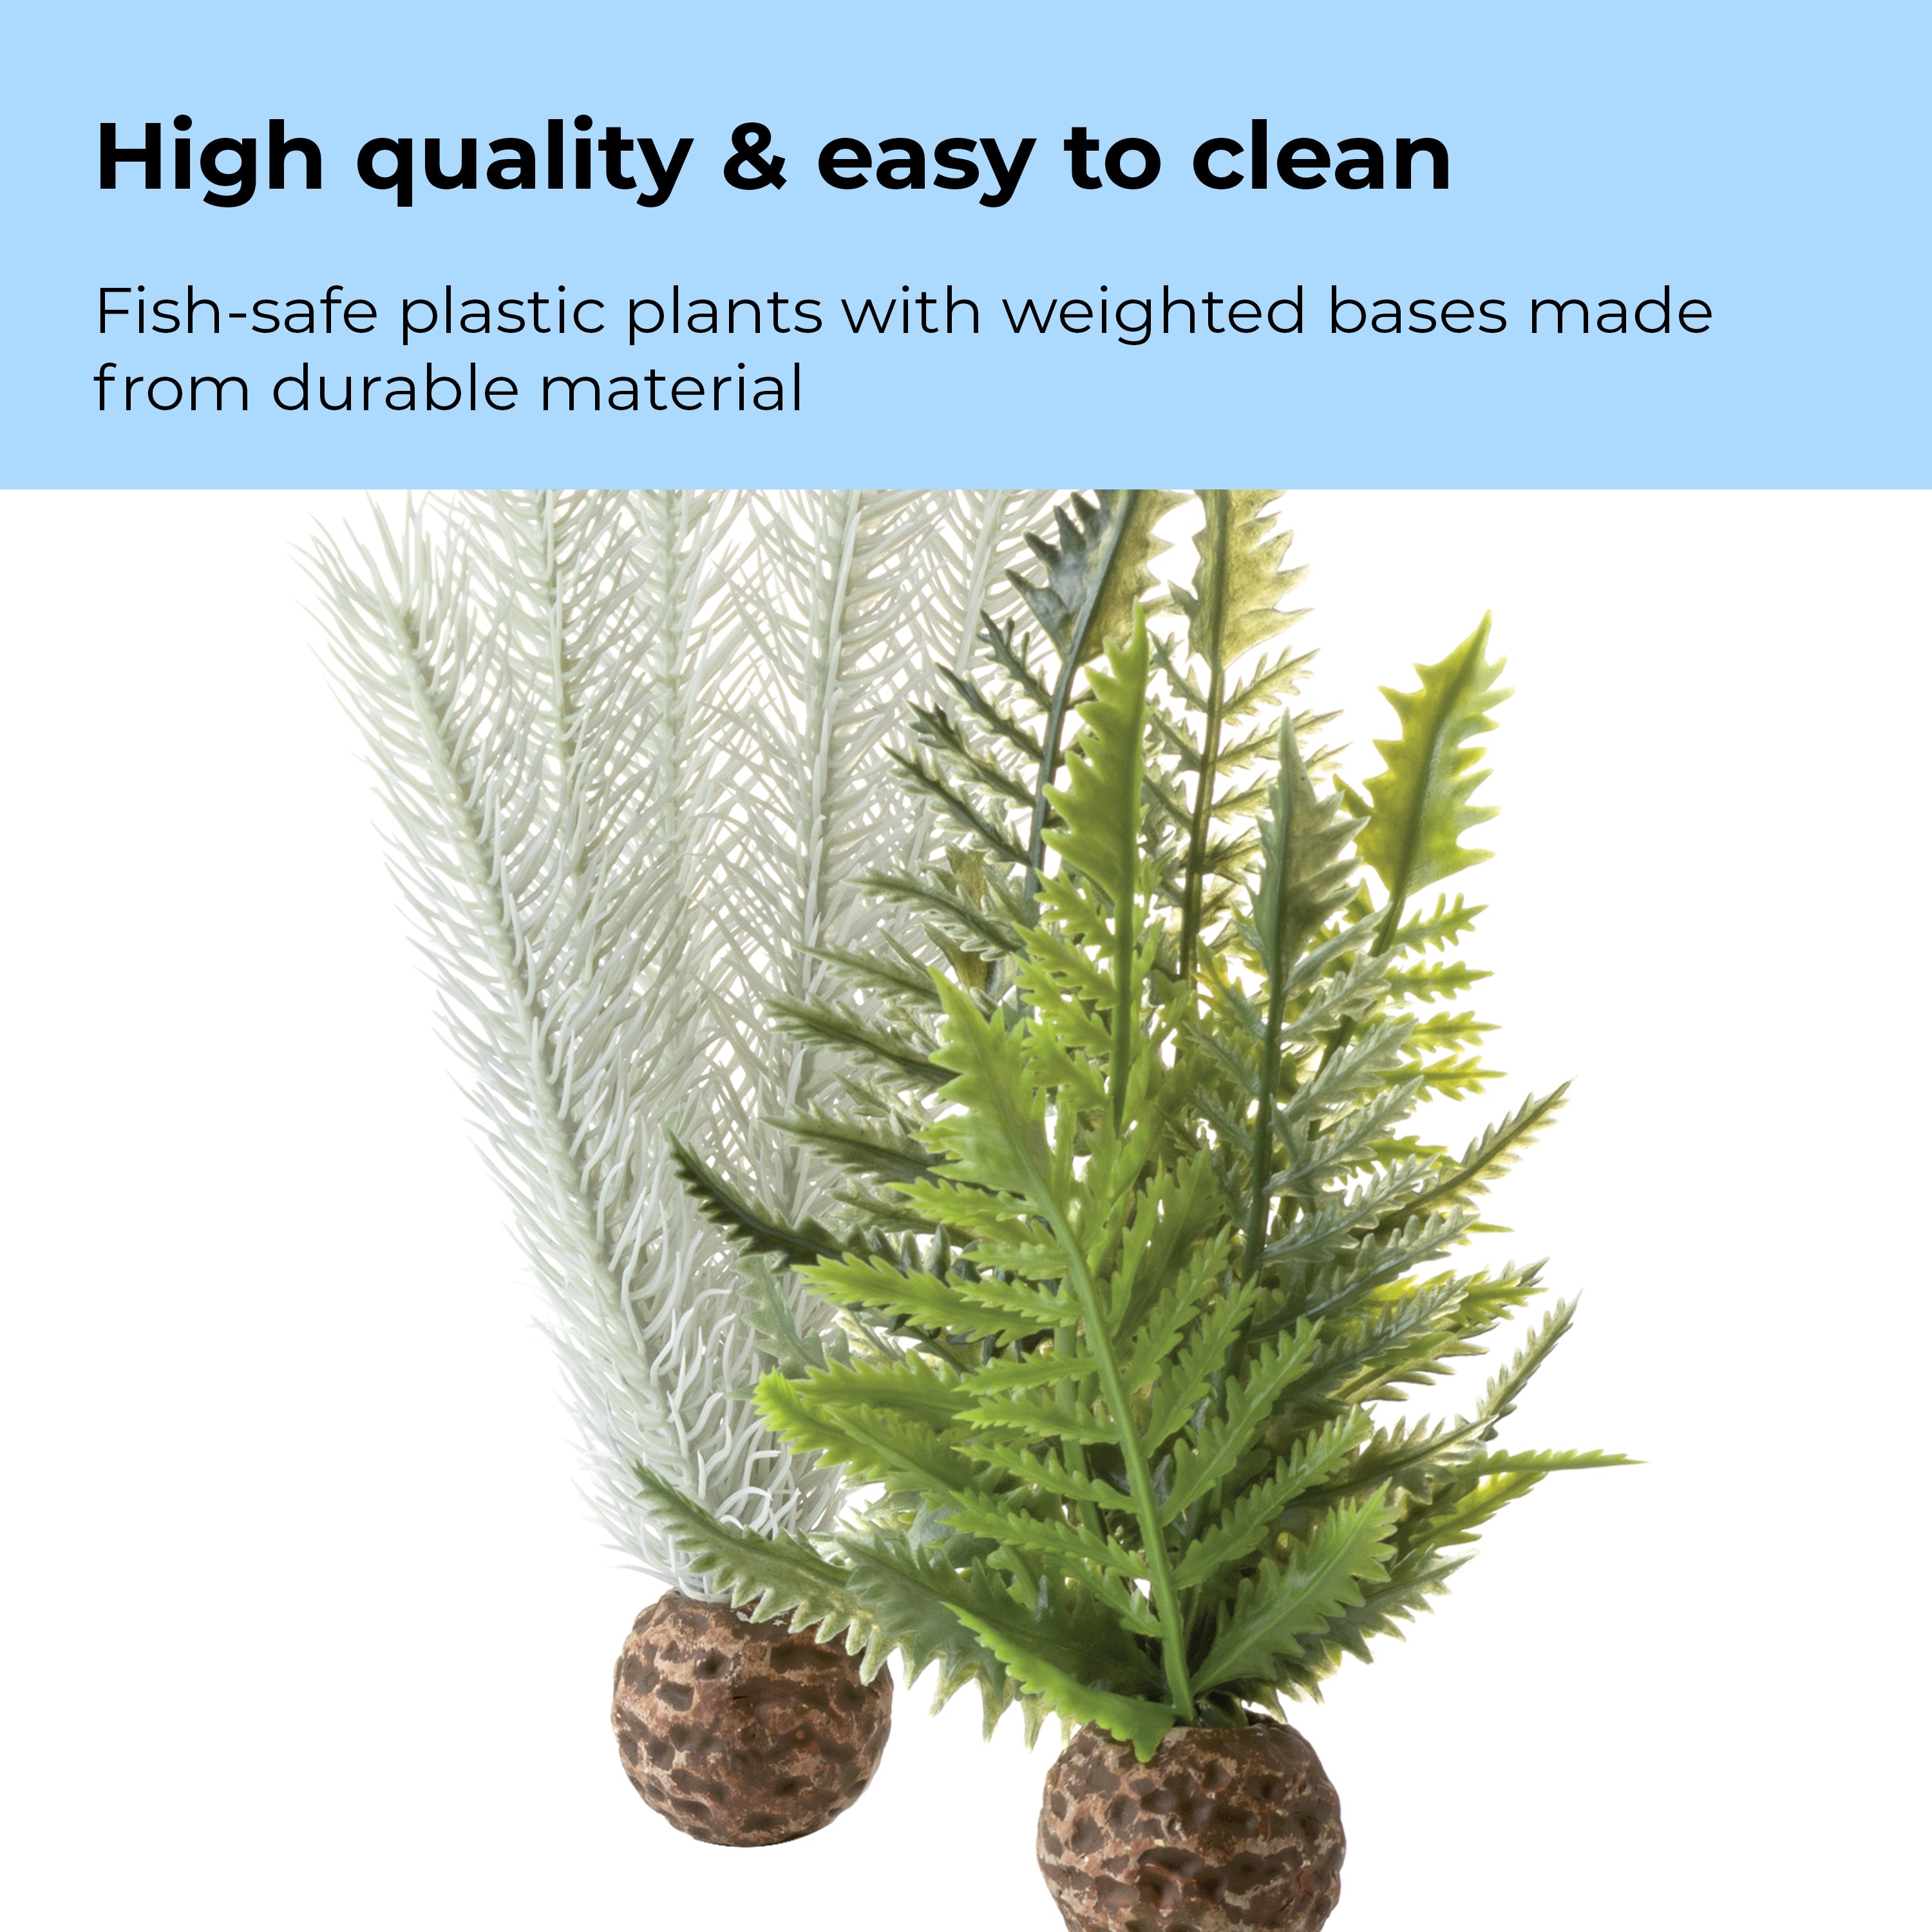 Thistle Fern Plant Set, small grey/green - High quality & easy to clean